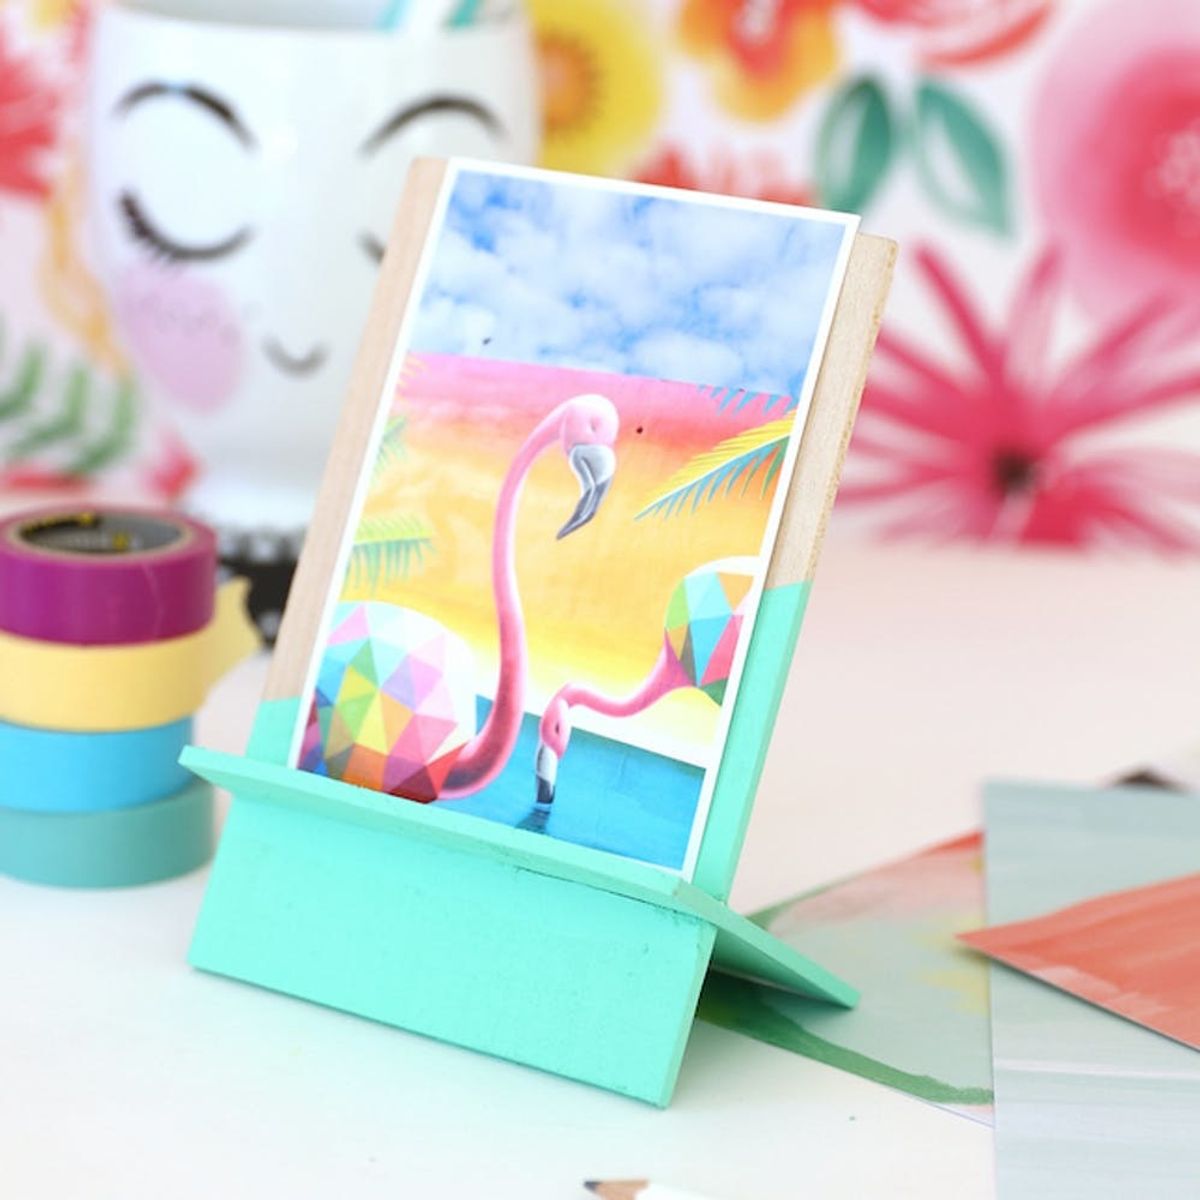 DIY Photo Frames, Beachy Pudding Cups + More Craft Projects to Tackle